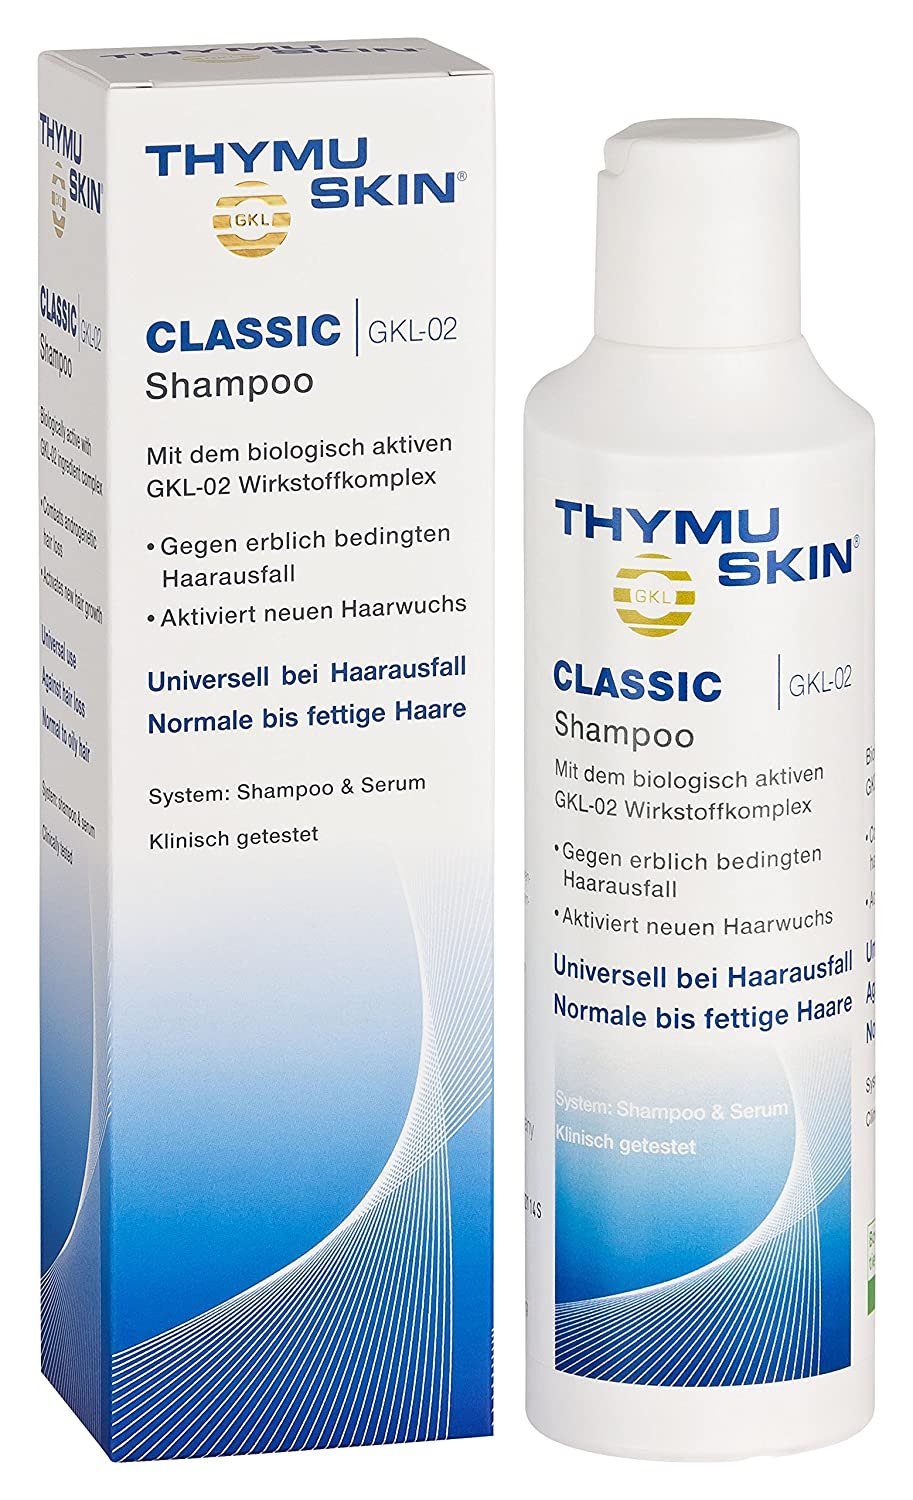 THYMUSKIN Classic - Hair Care Peptides Shampoo (Step #1) for Hair Growth Due to Hair Loss - for Normal to Oily & Greasy Hair and Scalp Condition